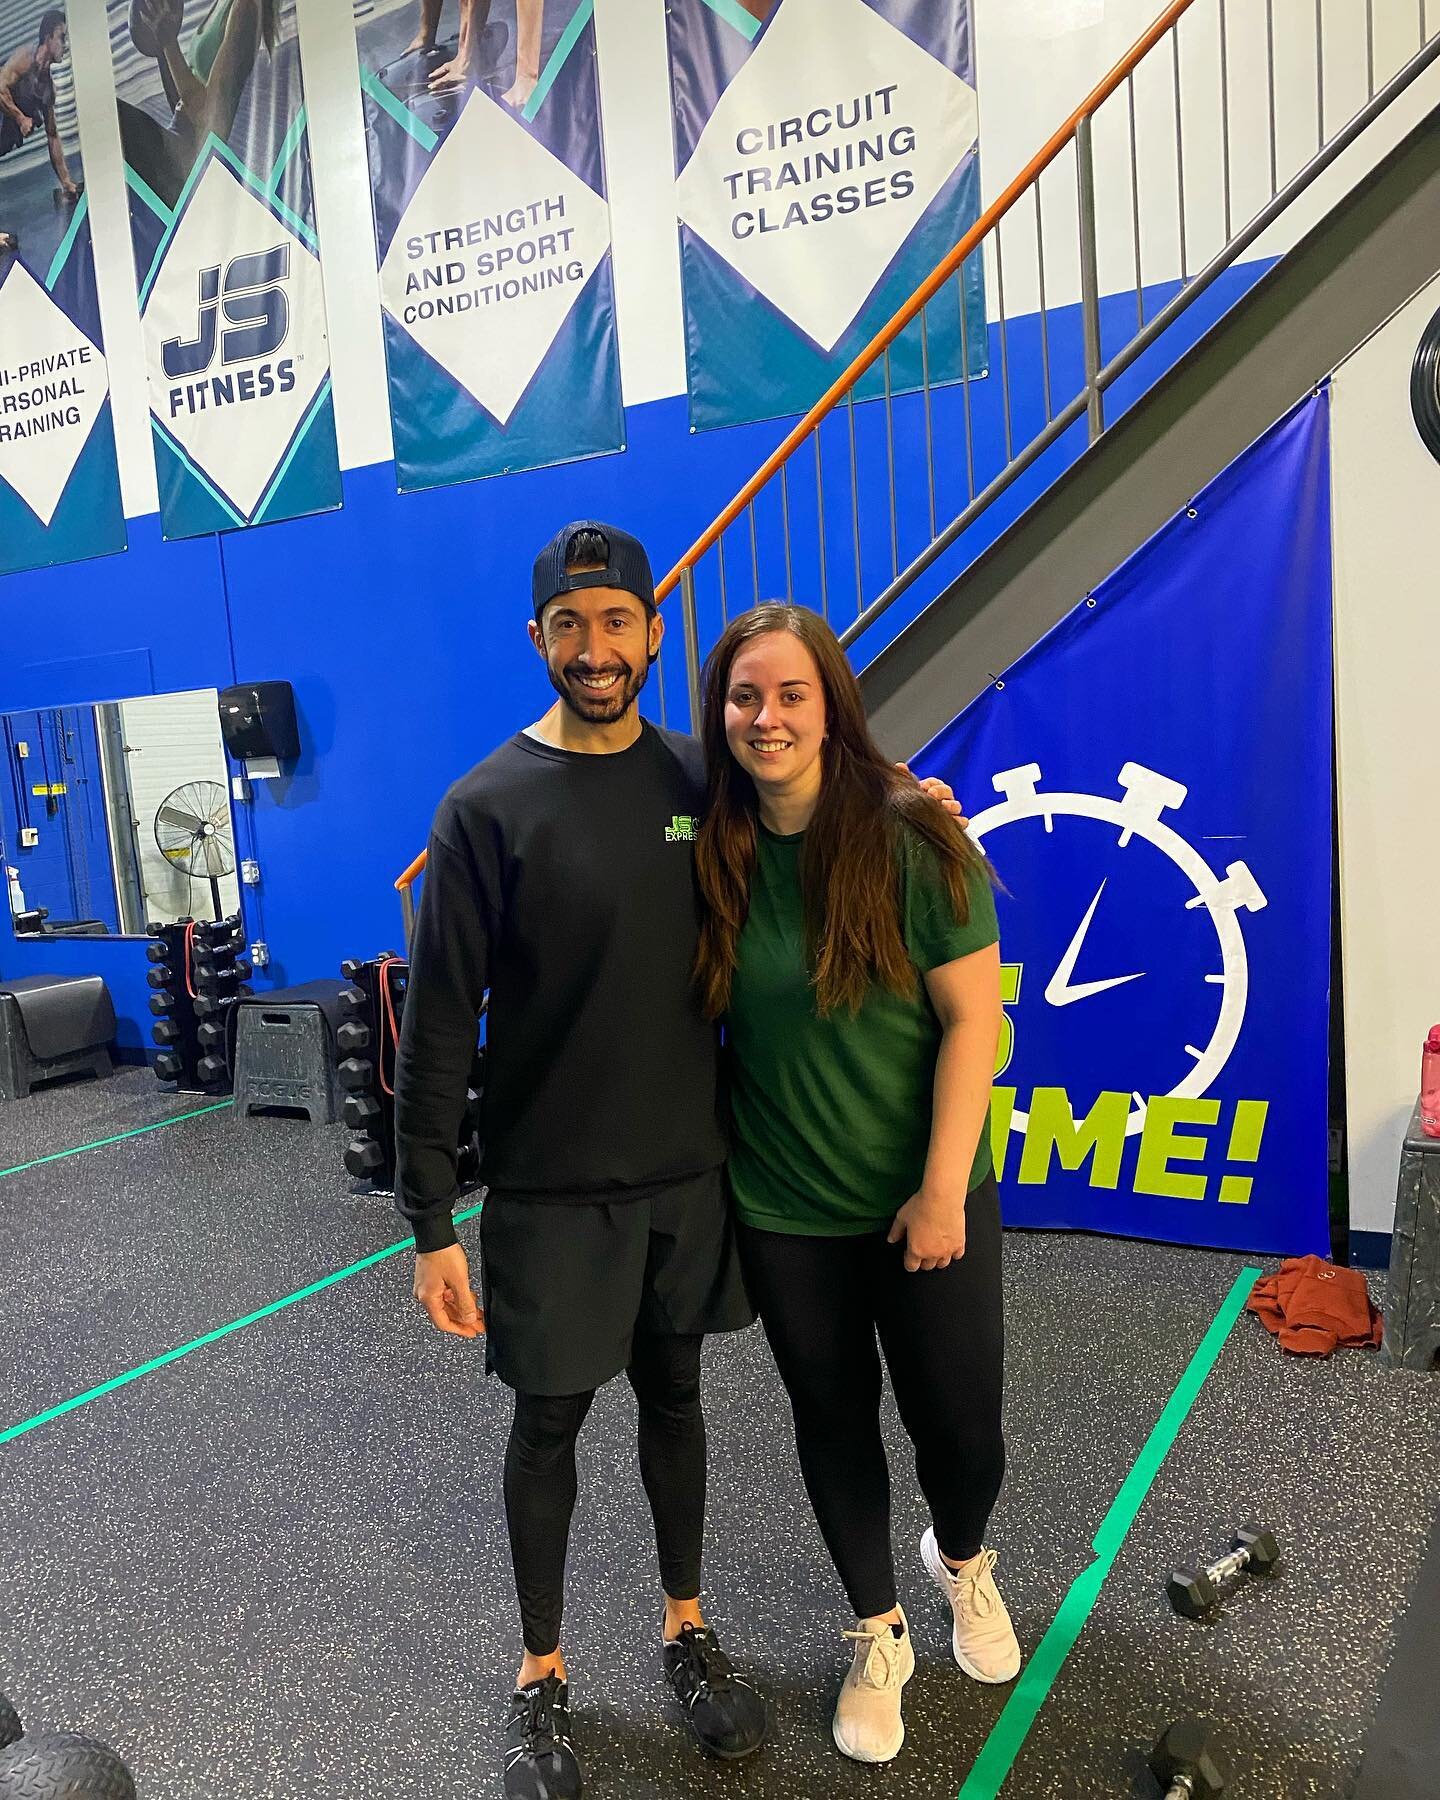 Testimonial from our amazing member Rachel!💚 

&ldquo;I started going to JS Fitness about 3 months ago. My friend took me to try some classes and I fell in love with the atmosphere. The 30 minute classes make it really easy to fit into my busy sched